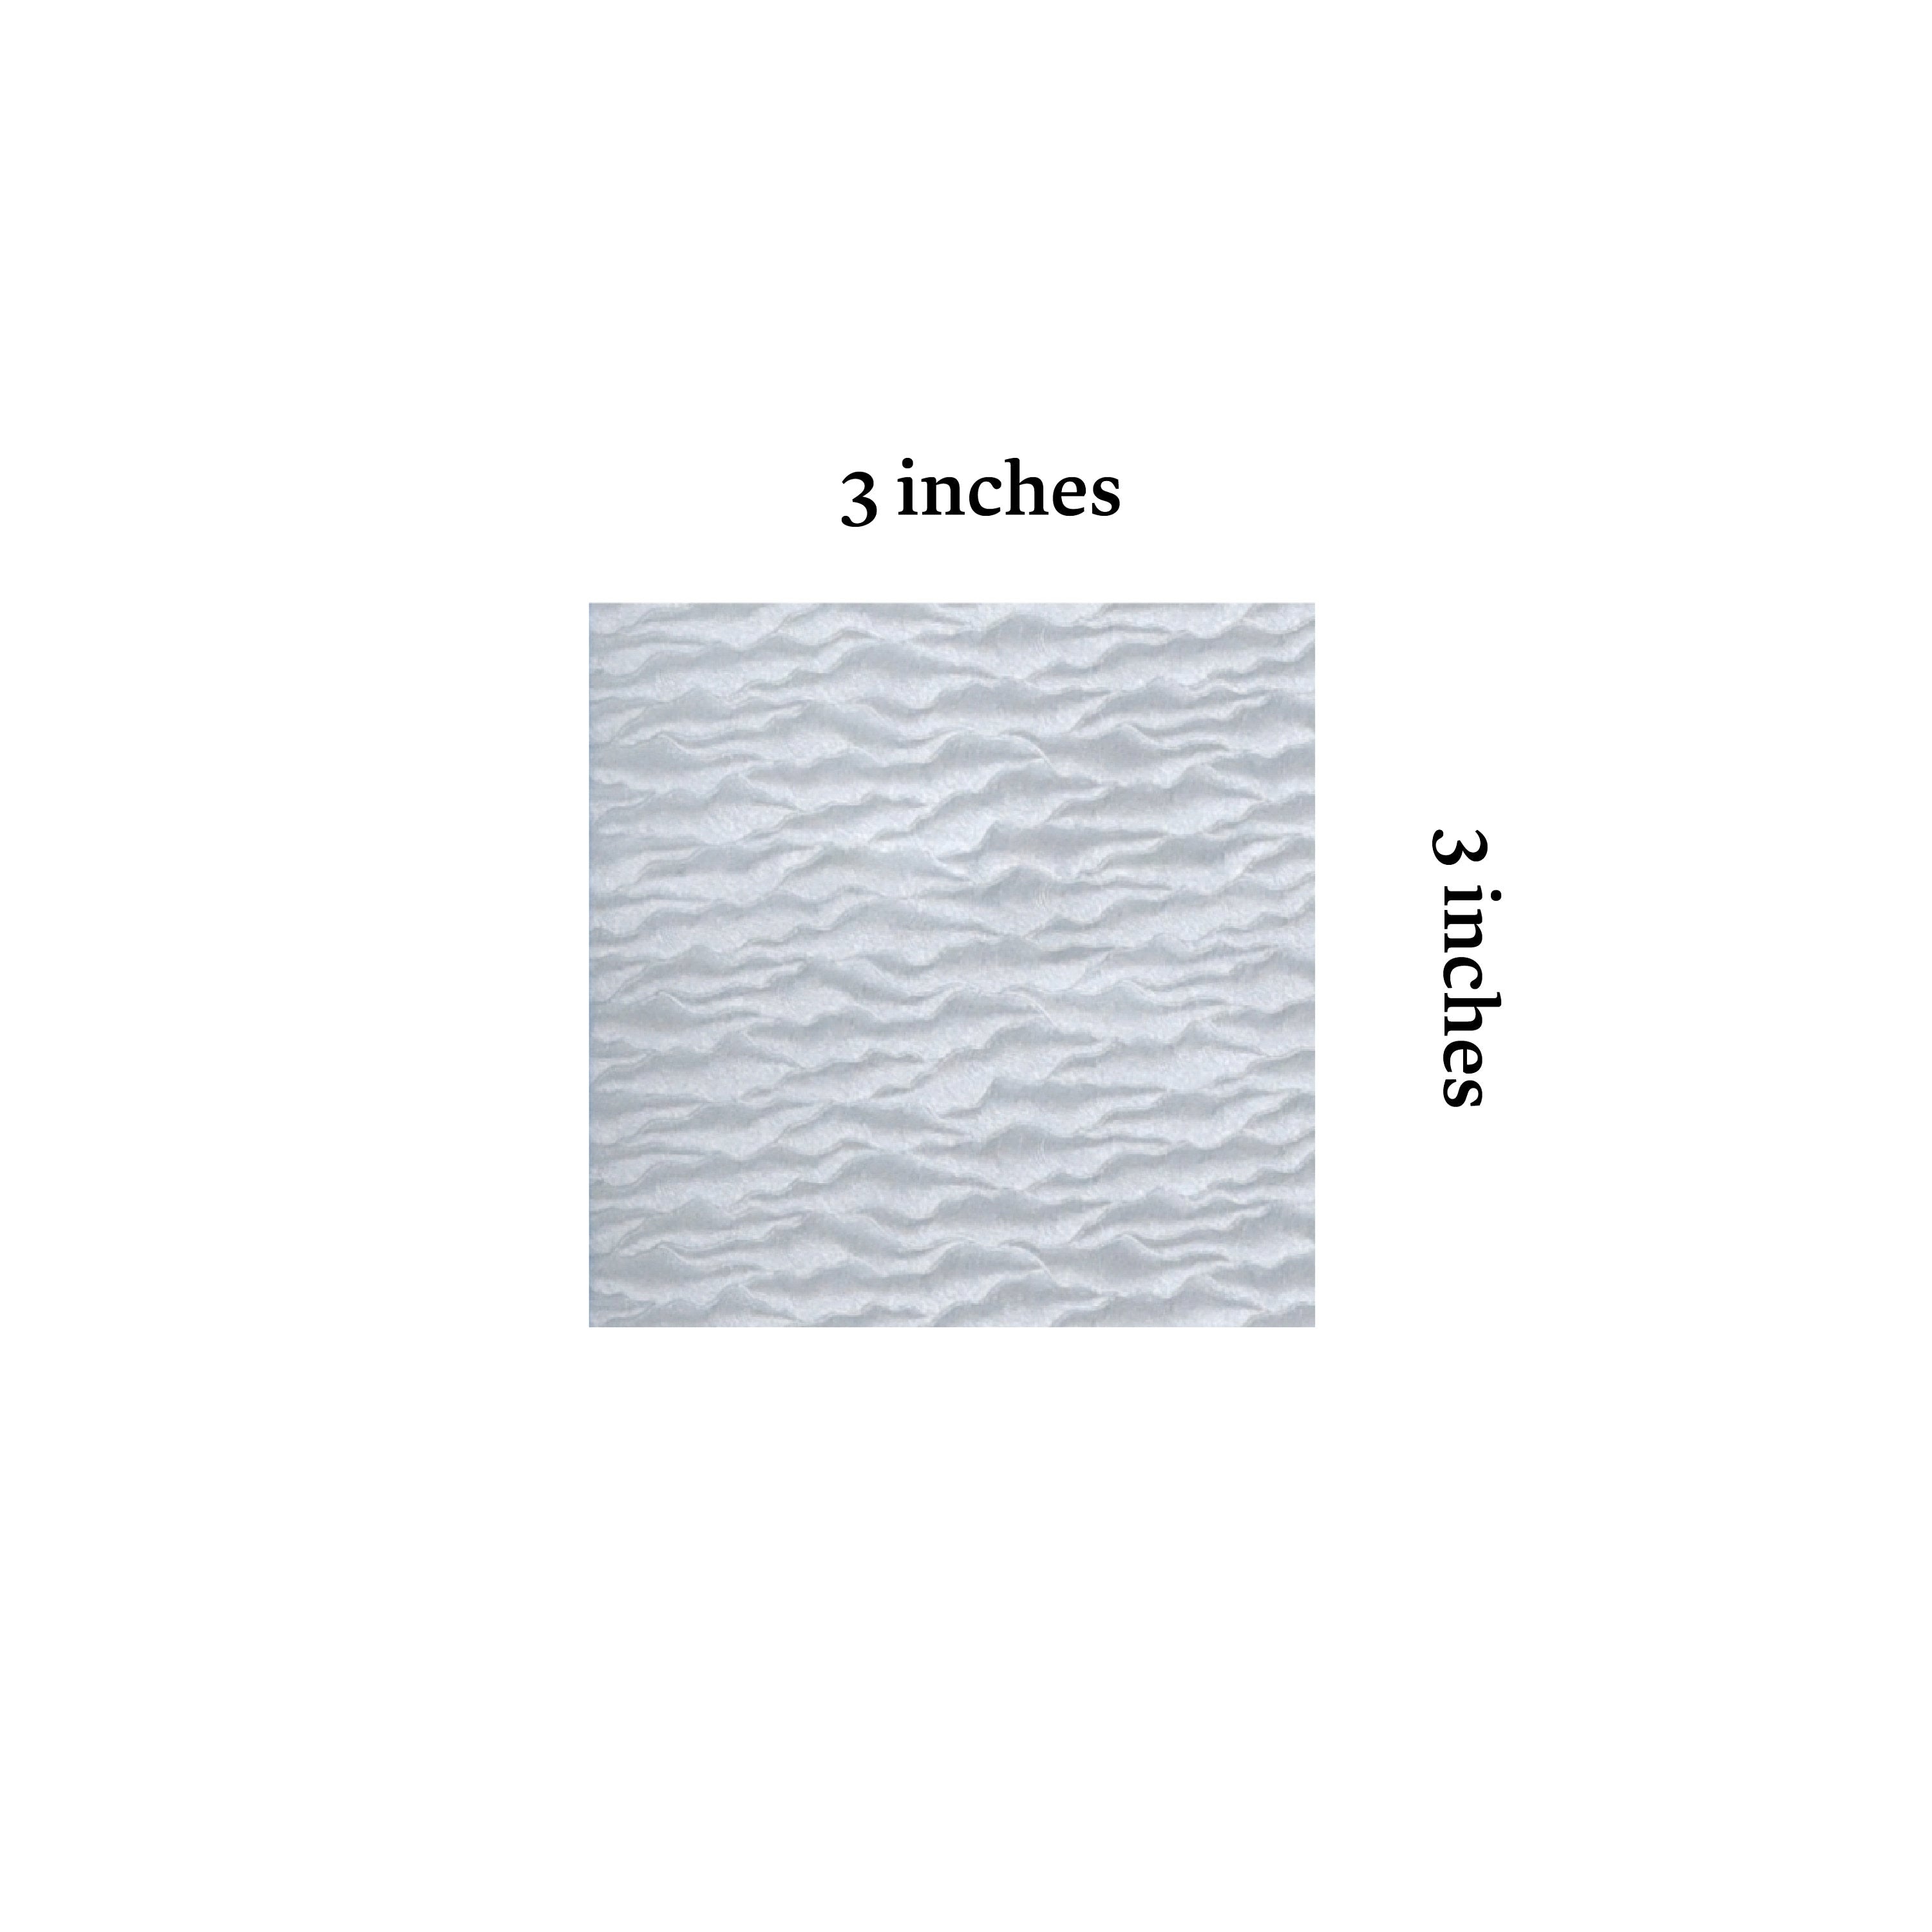 100 Silver Cloudy Origami Paper Sheets Paper Pack 3x3 inches